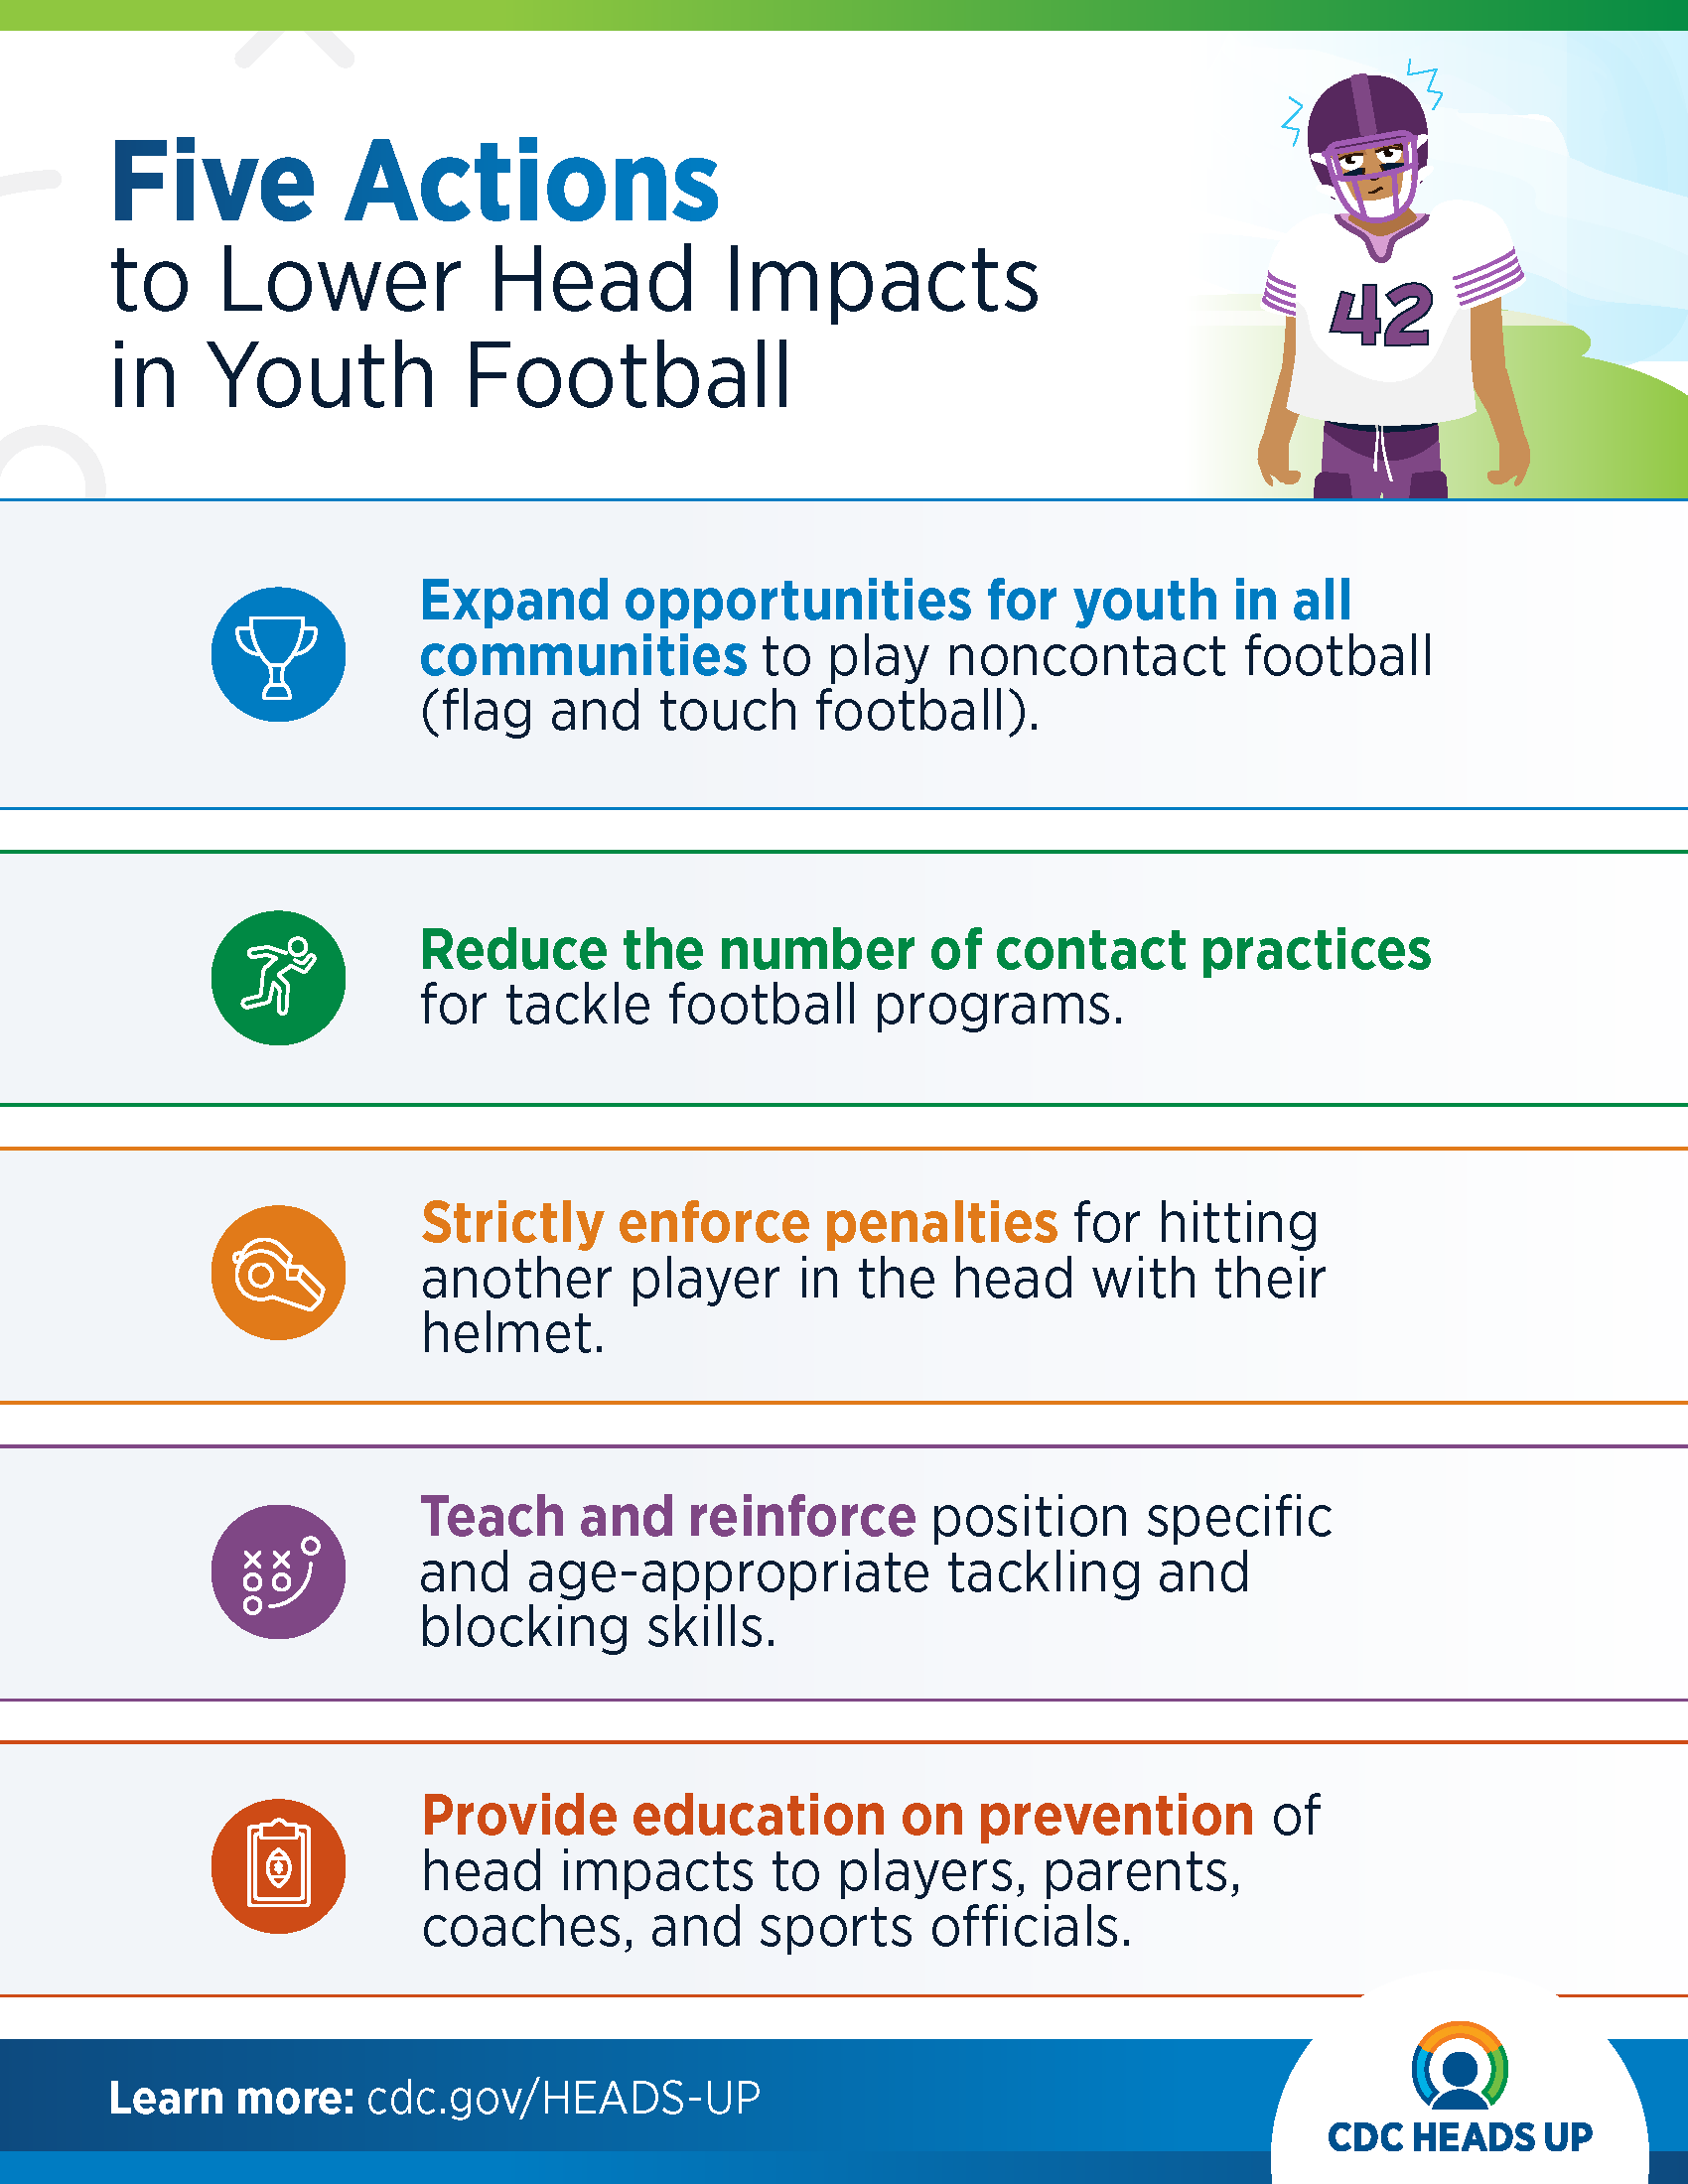 Five Actions to Lower Head Impacts in Youth Football graphic